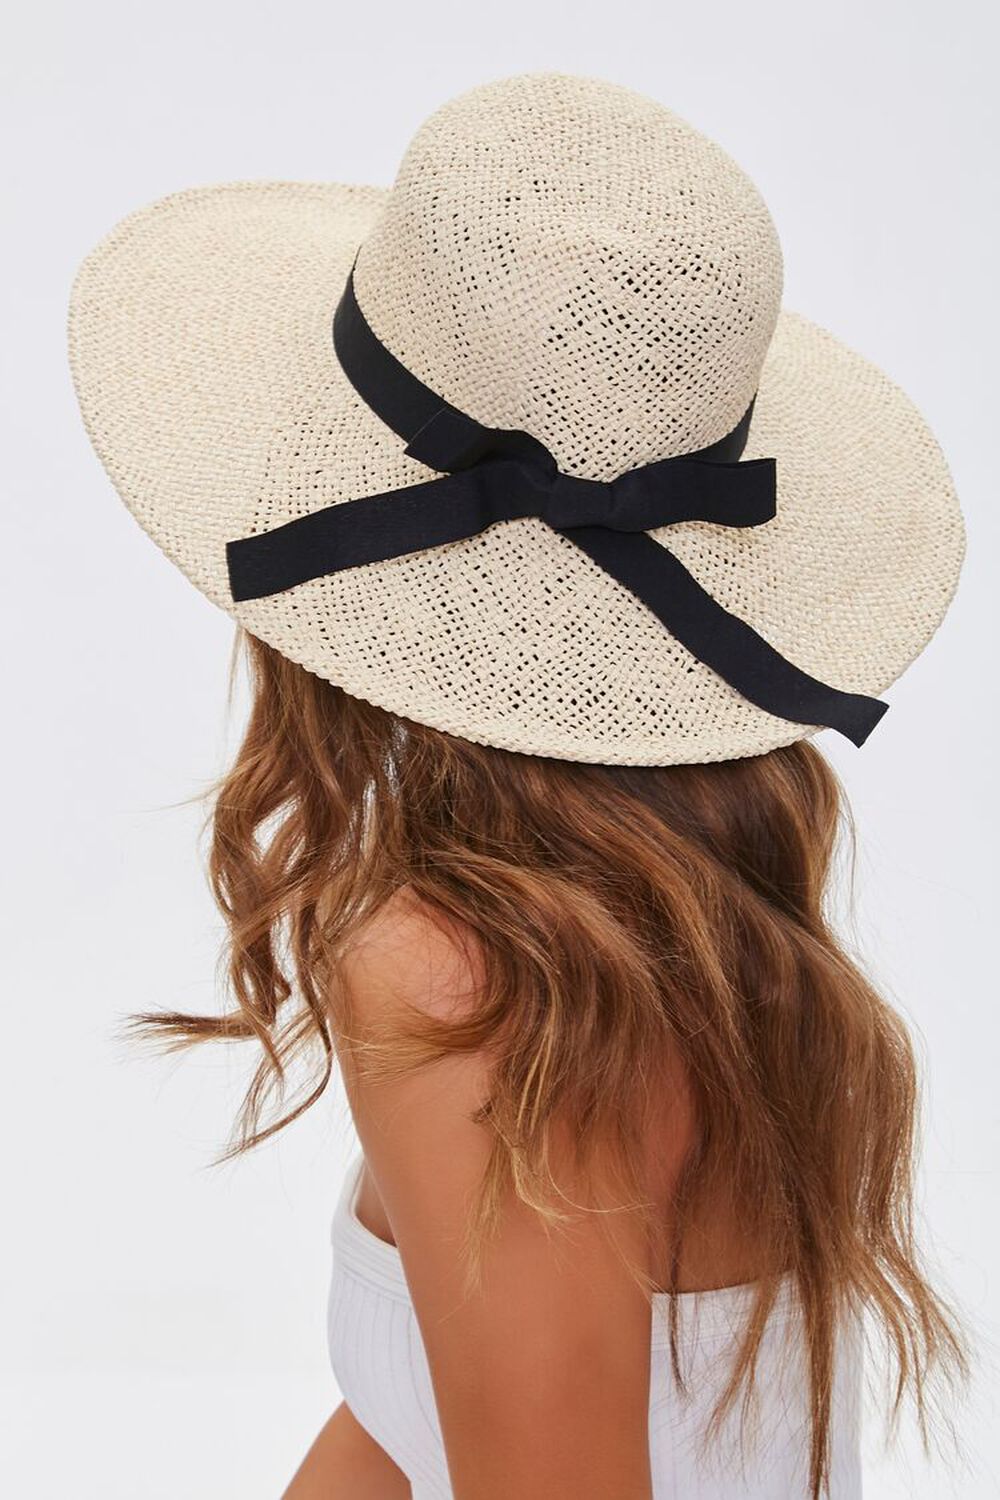 NATURAL/BLACK Faux Straw Bow Ribbon Boater Hat, image 1